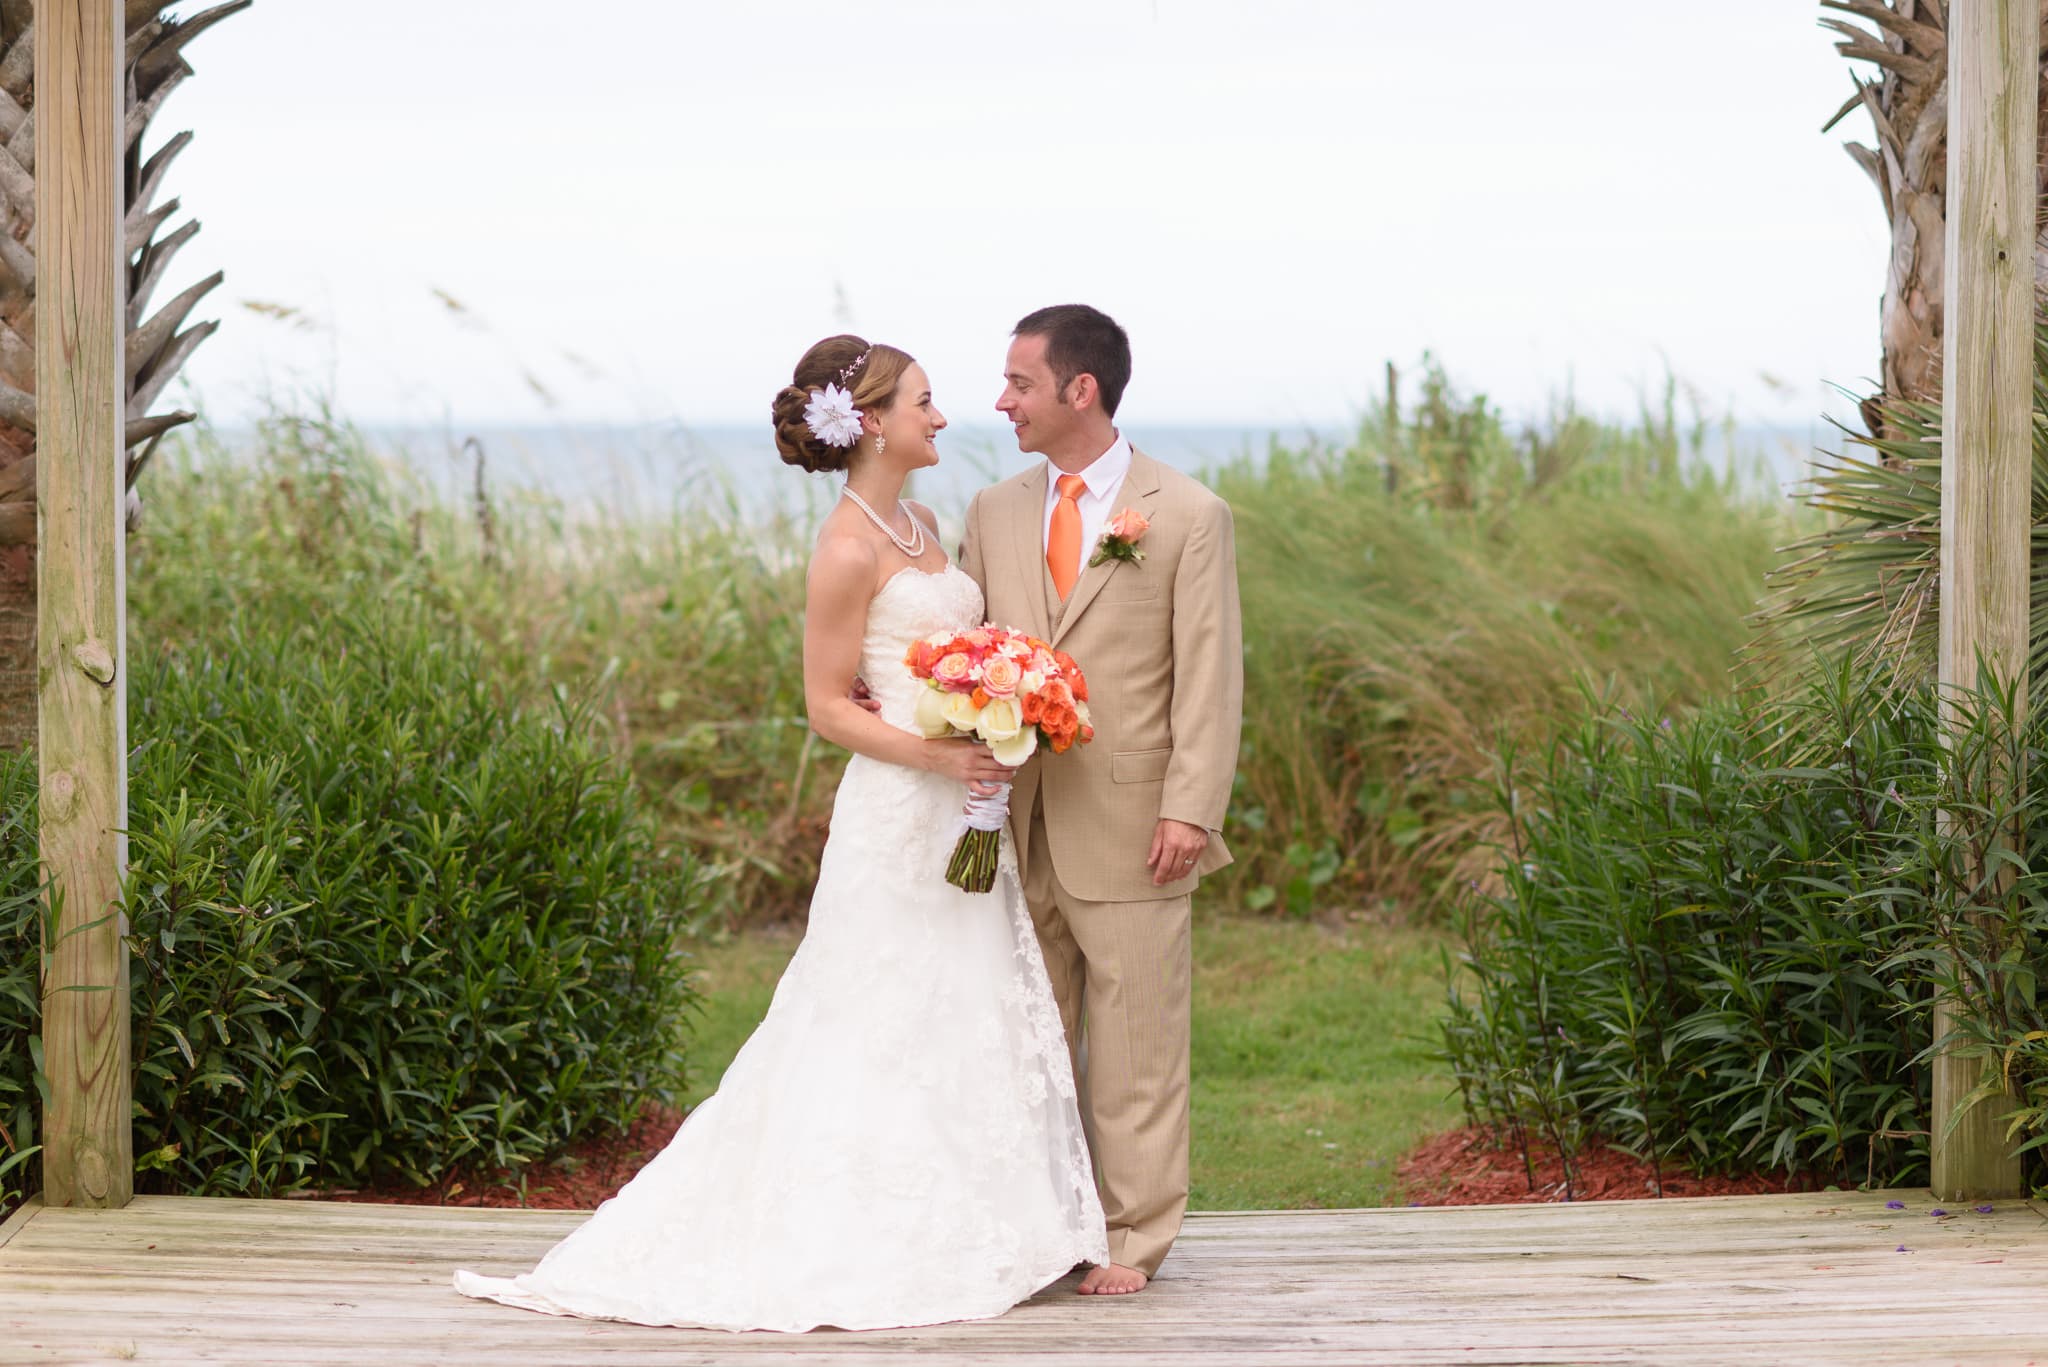 Bride and groom smiling at each other - Hilton at Kingston Plantation